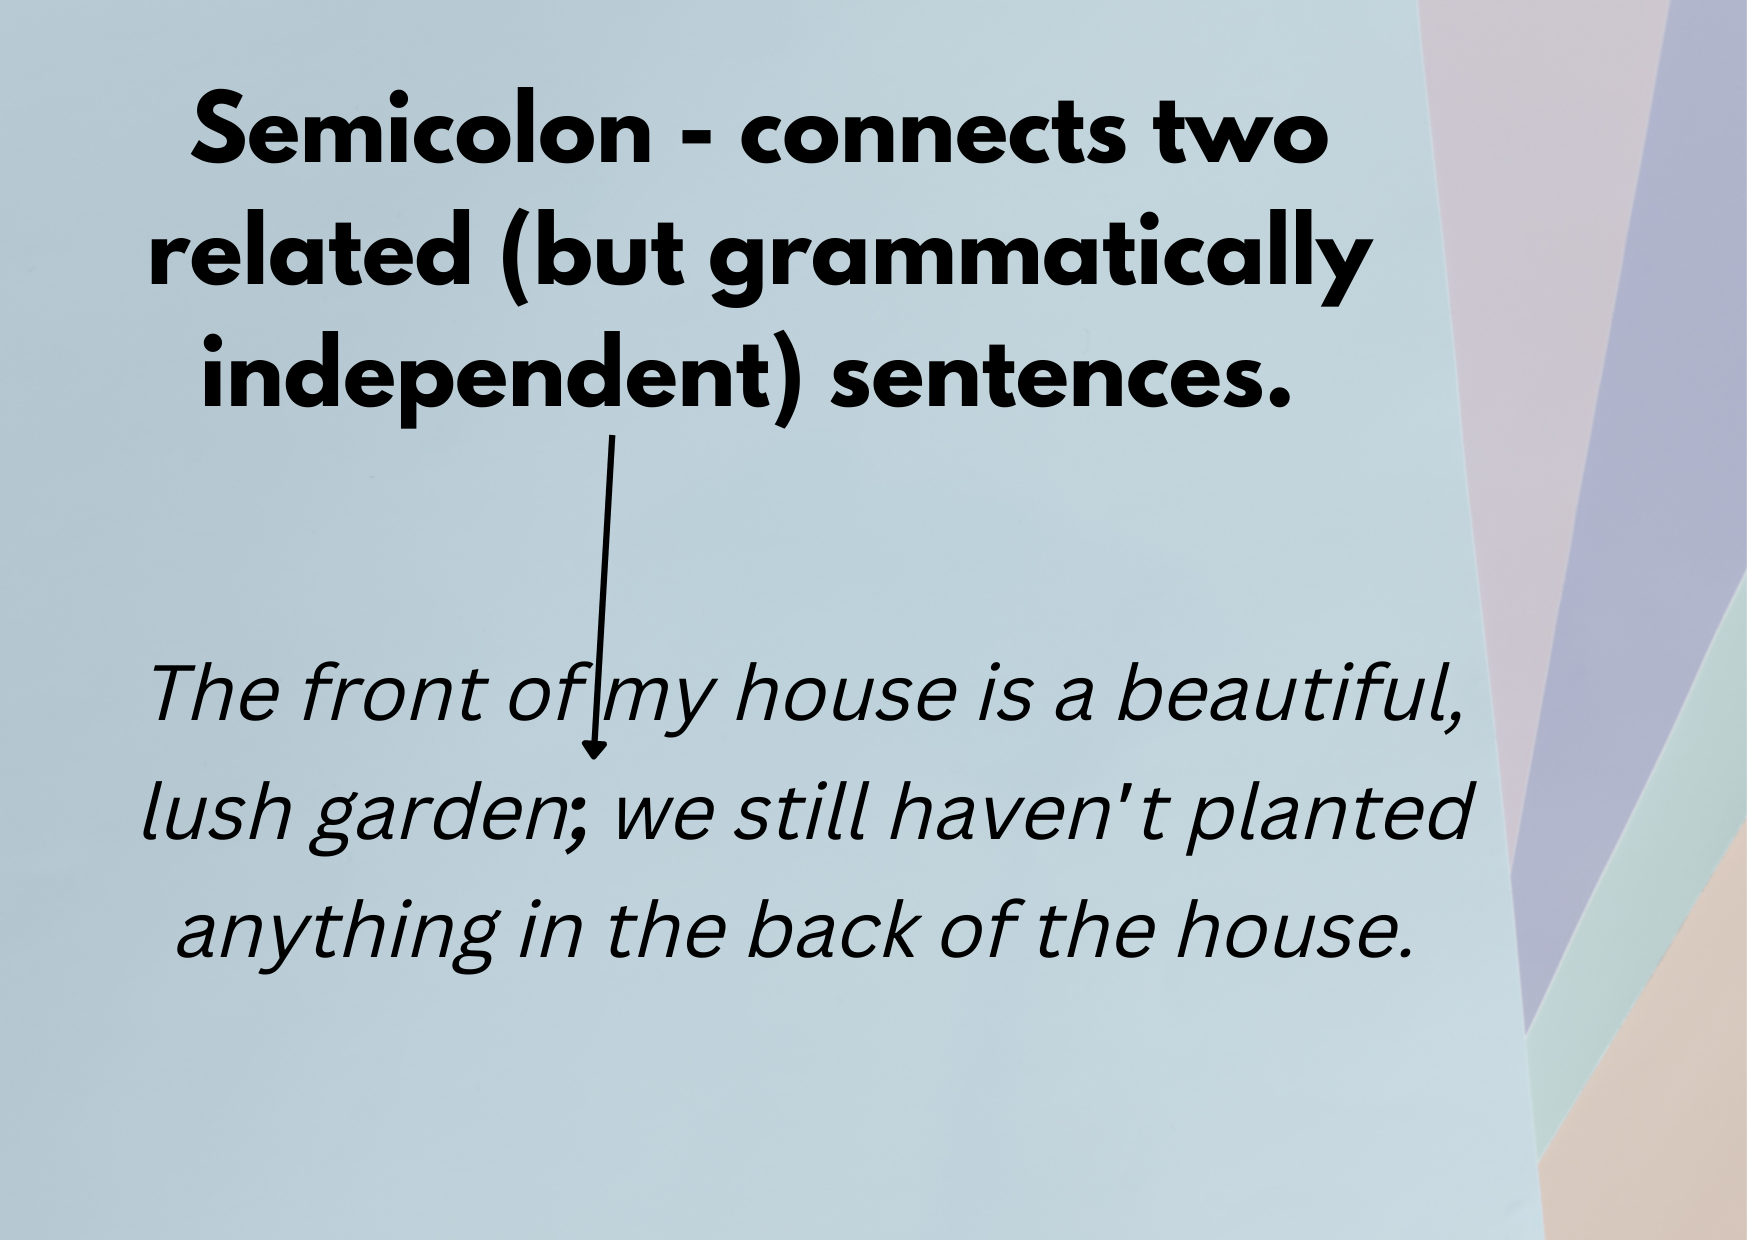 A graphic used to explain that a semicolon is used to connect two grammatically independent sentences. 